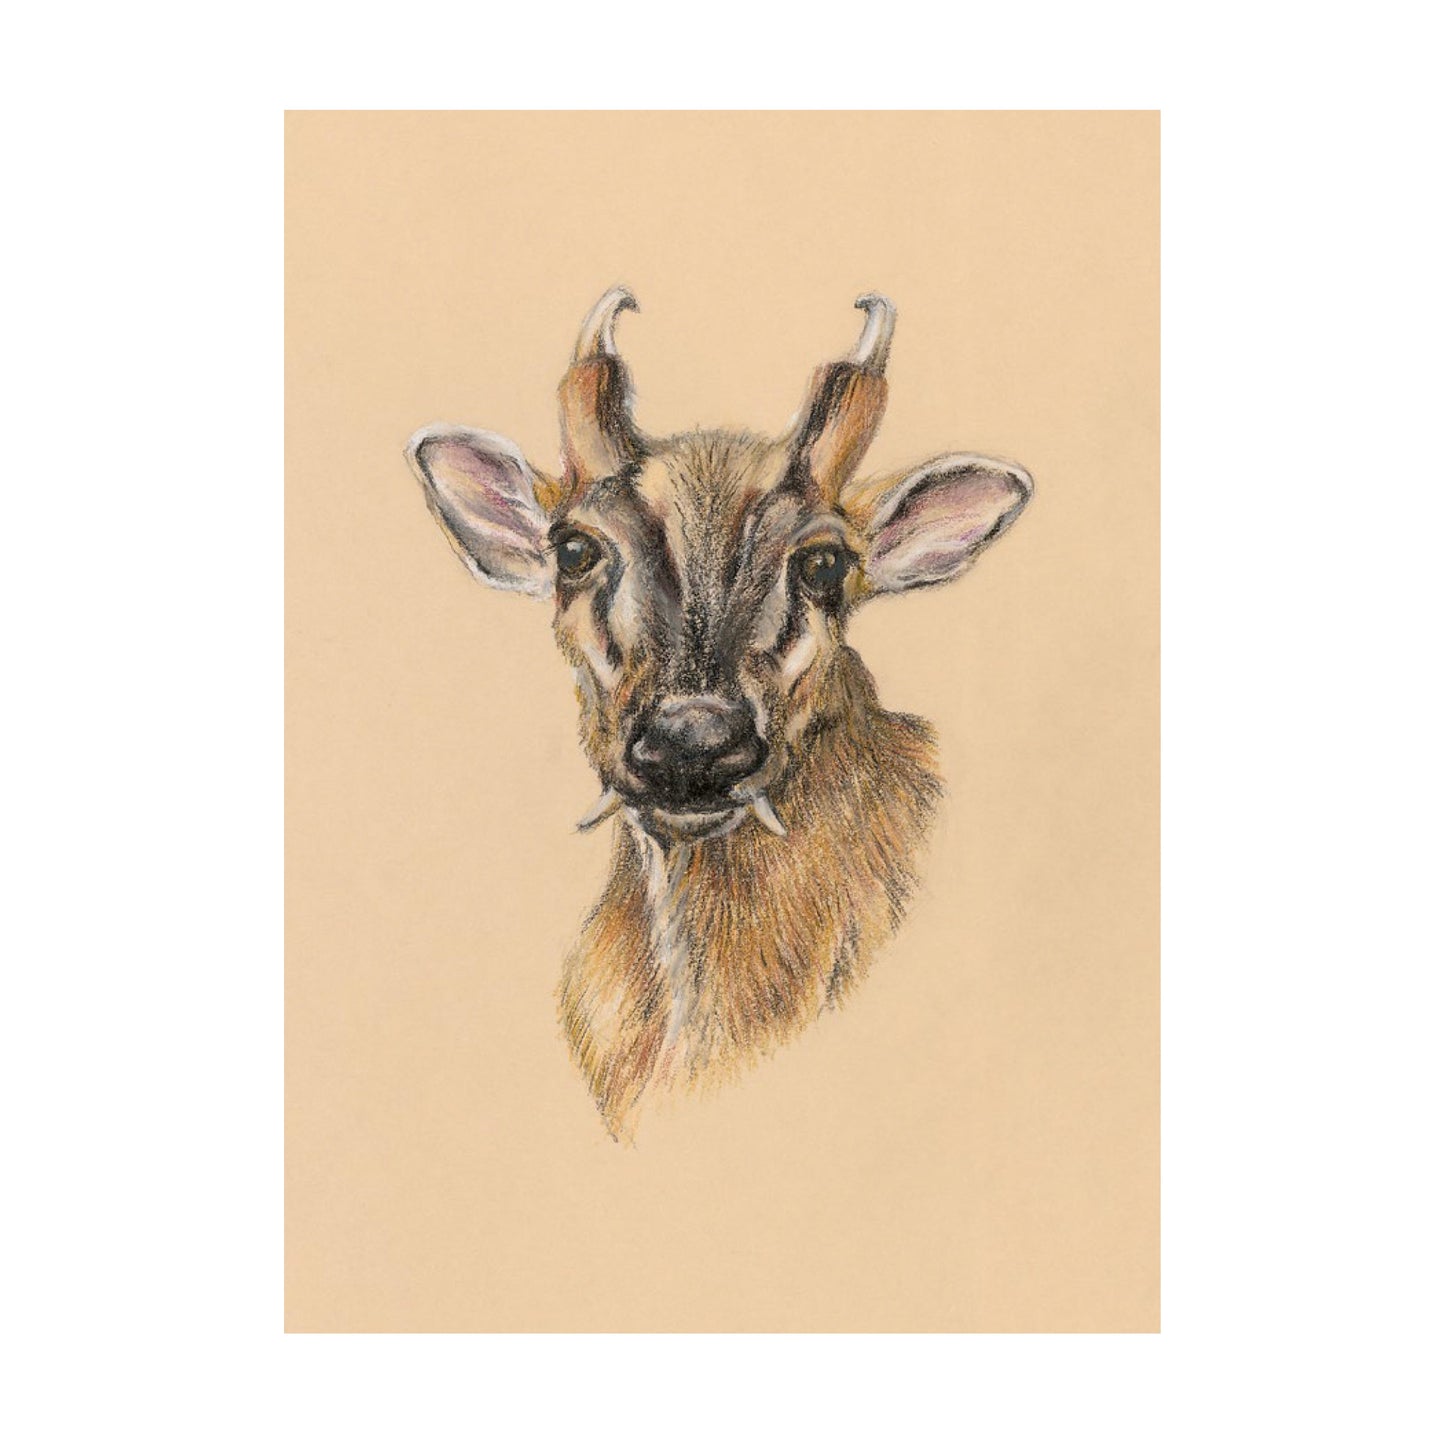 "Muntjac Buck" Signed Limited Edition Giclée Print